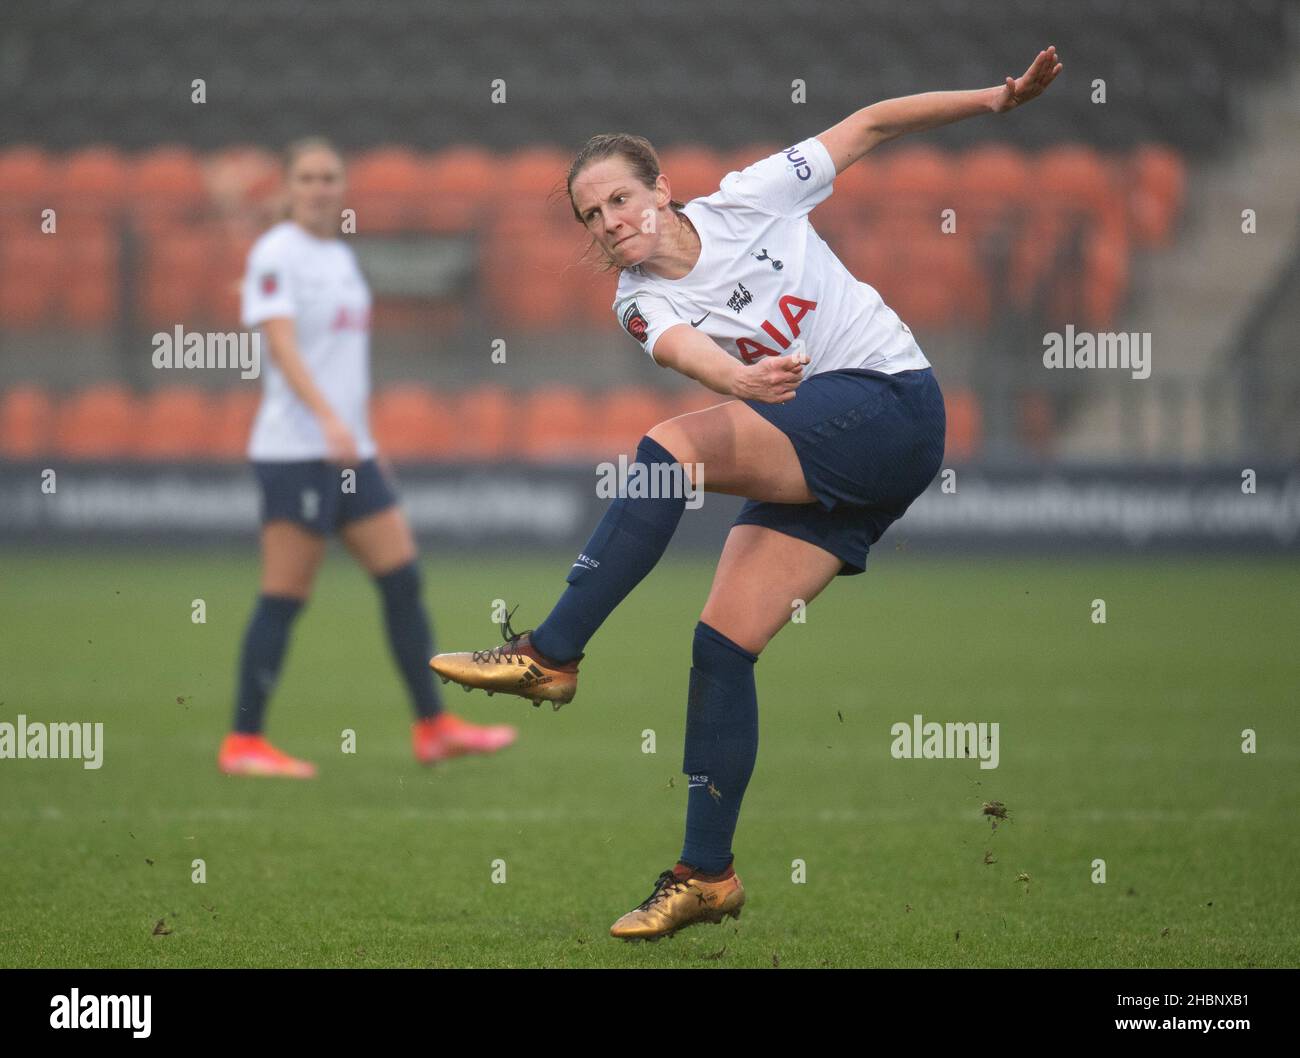 London, UK. 19th Dec, 2021. Spurs Women Kerys Harrop during the FAWSL match  between Tottenham Hotspur Women and Everton Ladies at The Hive, London,  England on 19 December 2021. Photo by Andrew